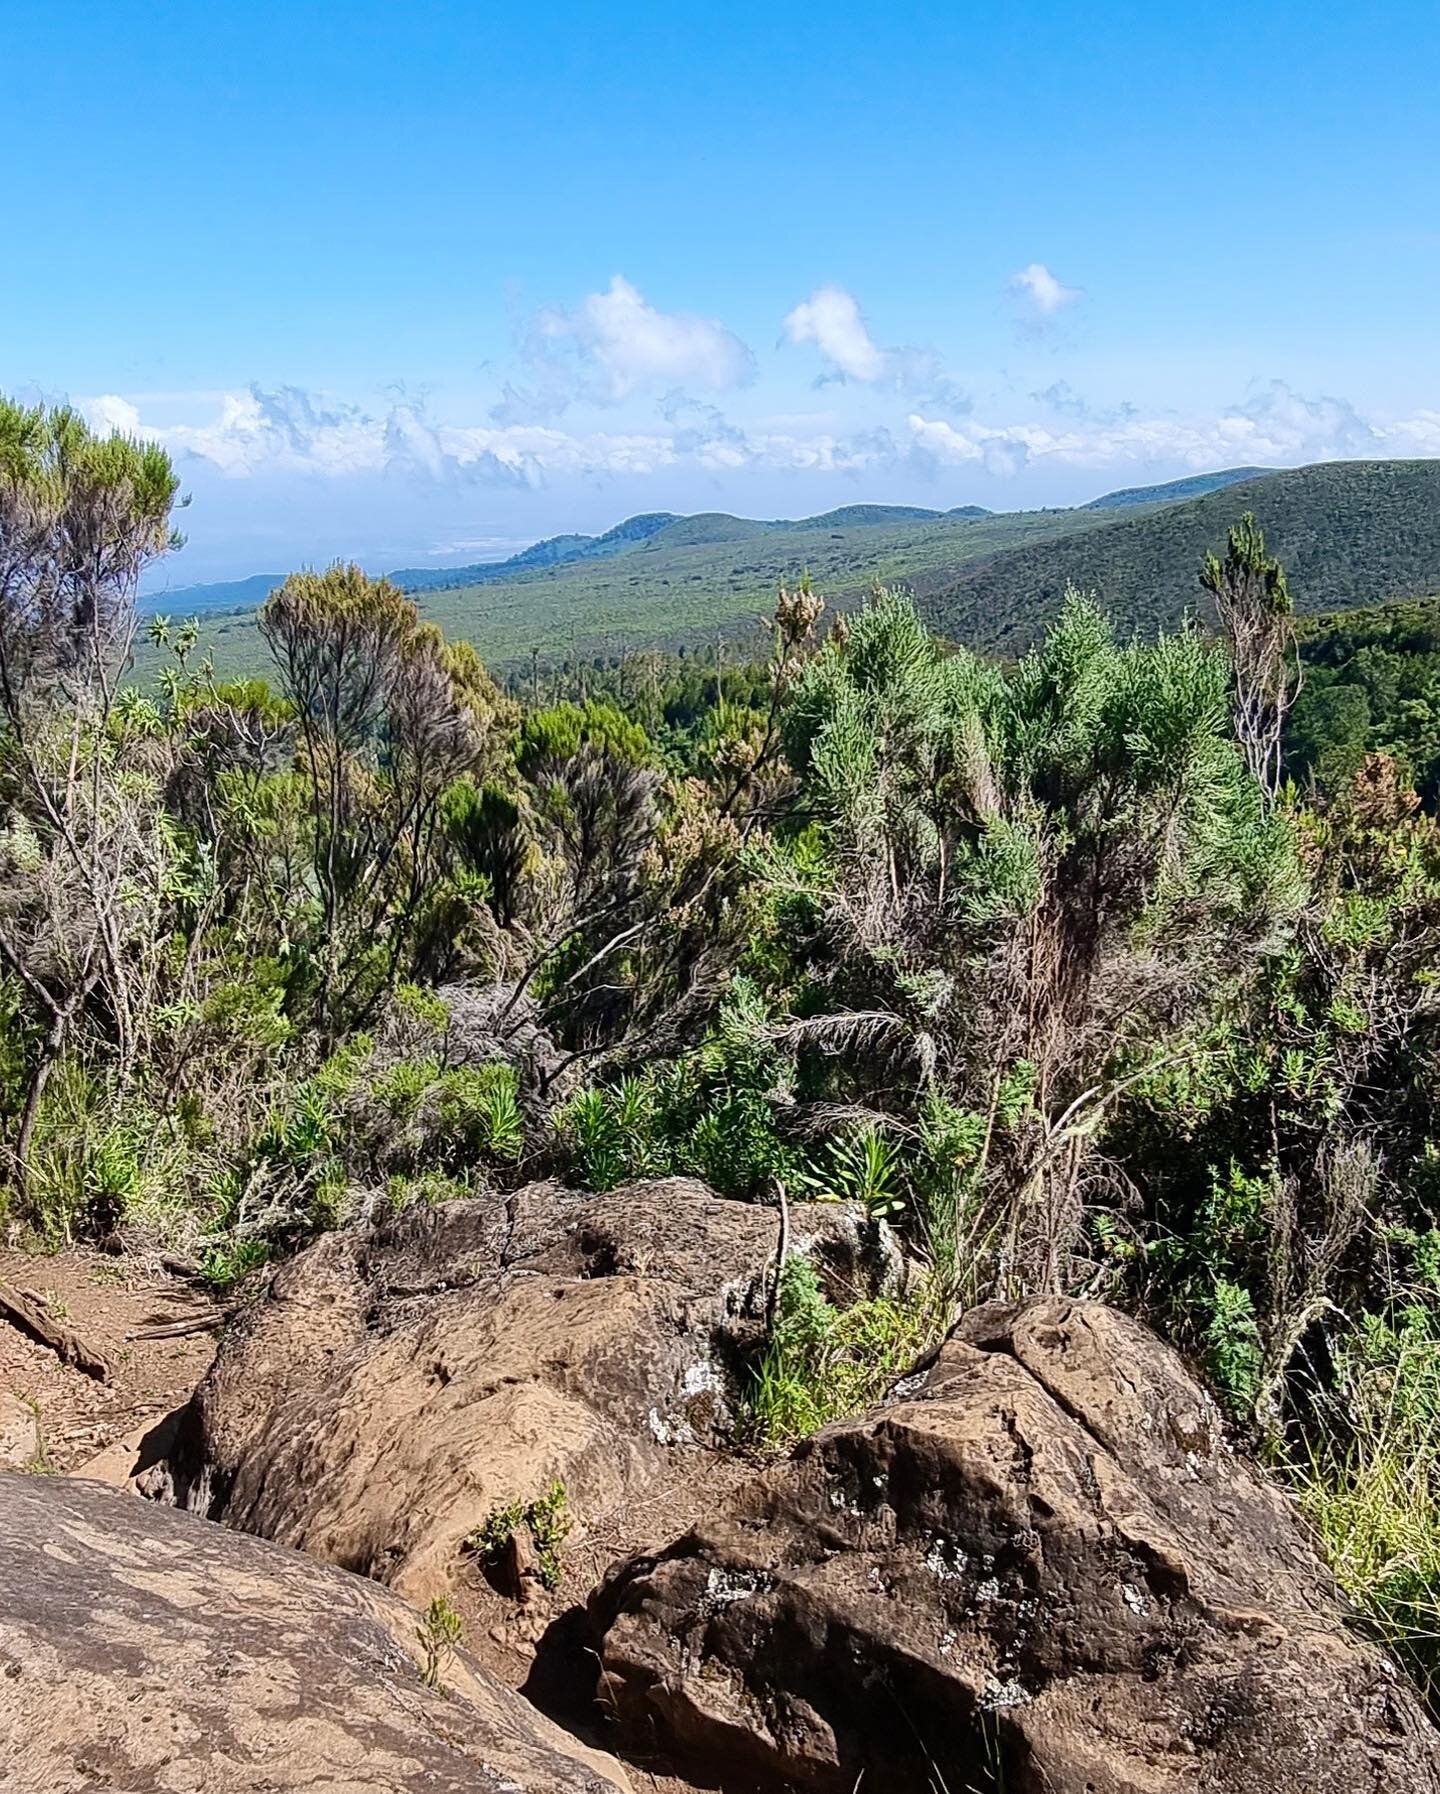 At 3000m we leave the rainforest behind and enter the Heather-Moorland climate zone. Gusting winds, giant heathers, wild grasses and a rocky trail replaces the rainforest very quickly. Goodbye shade, hello scorching sun!

Mount Kilimanjaro has 5 dist